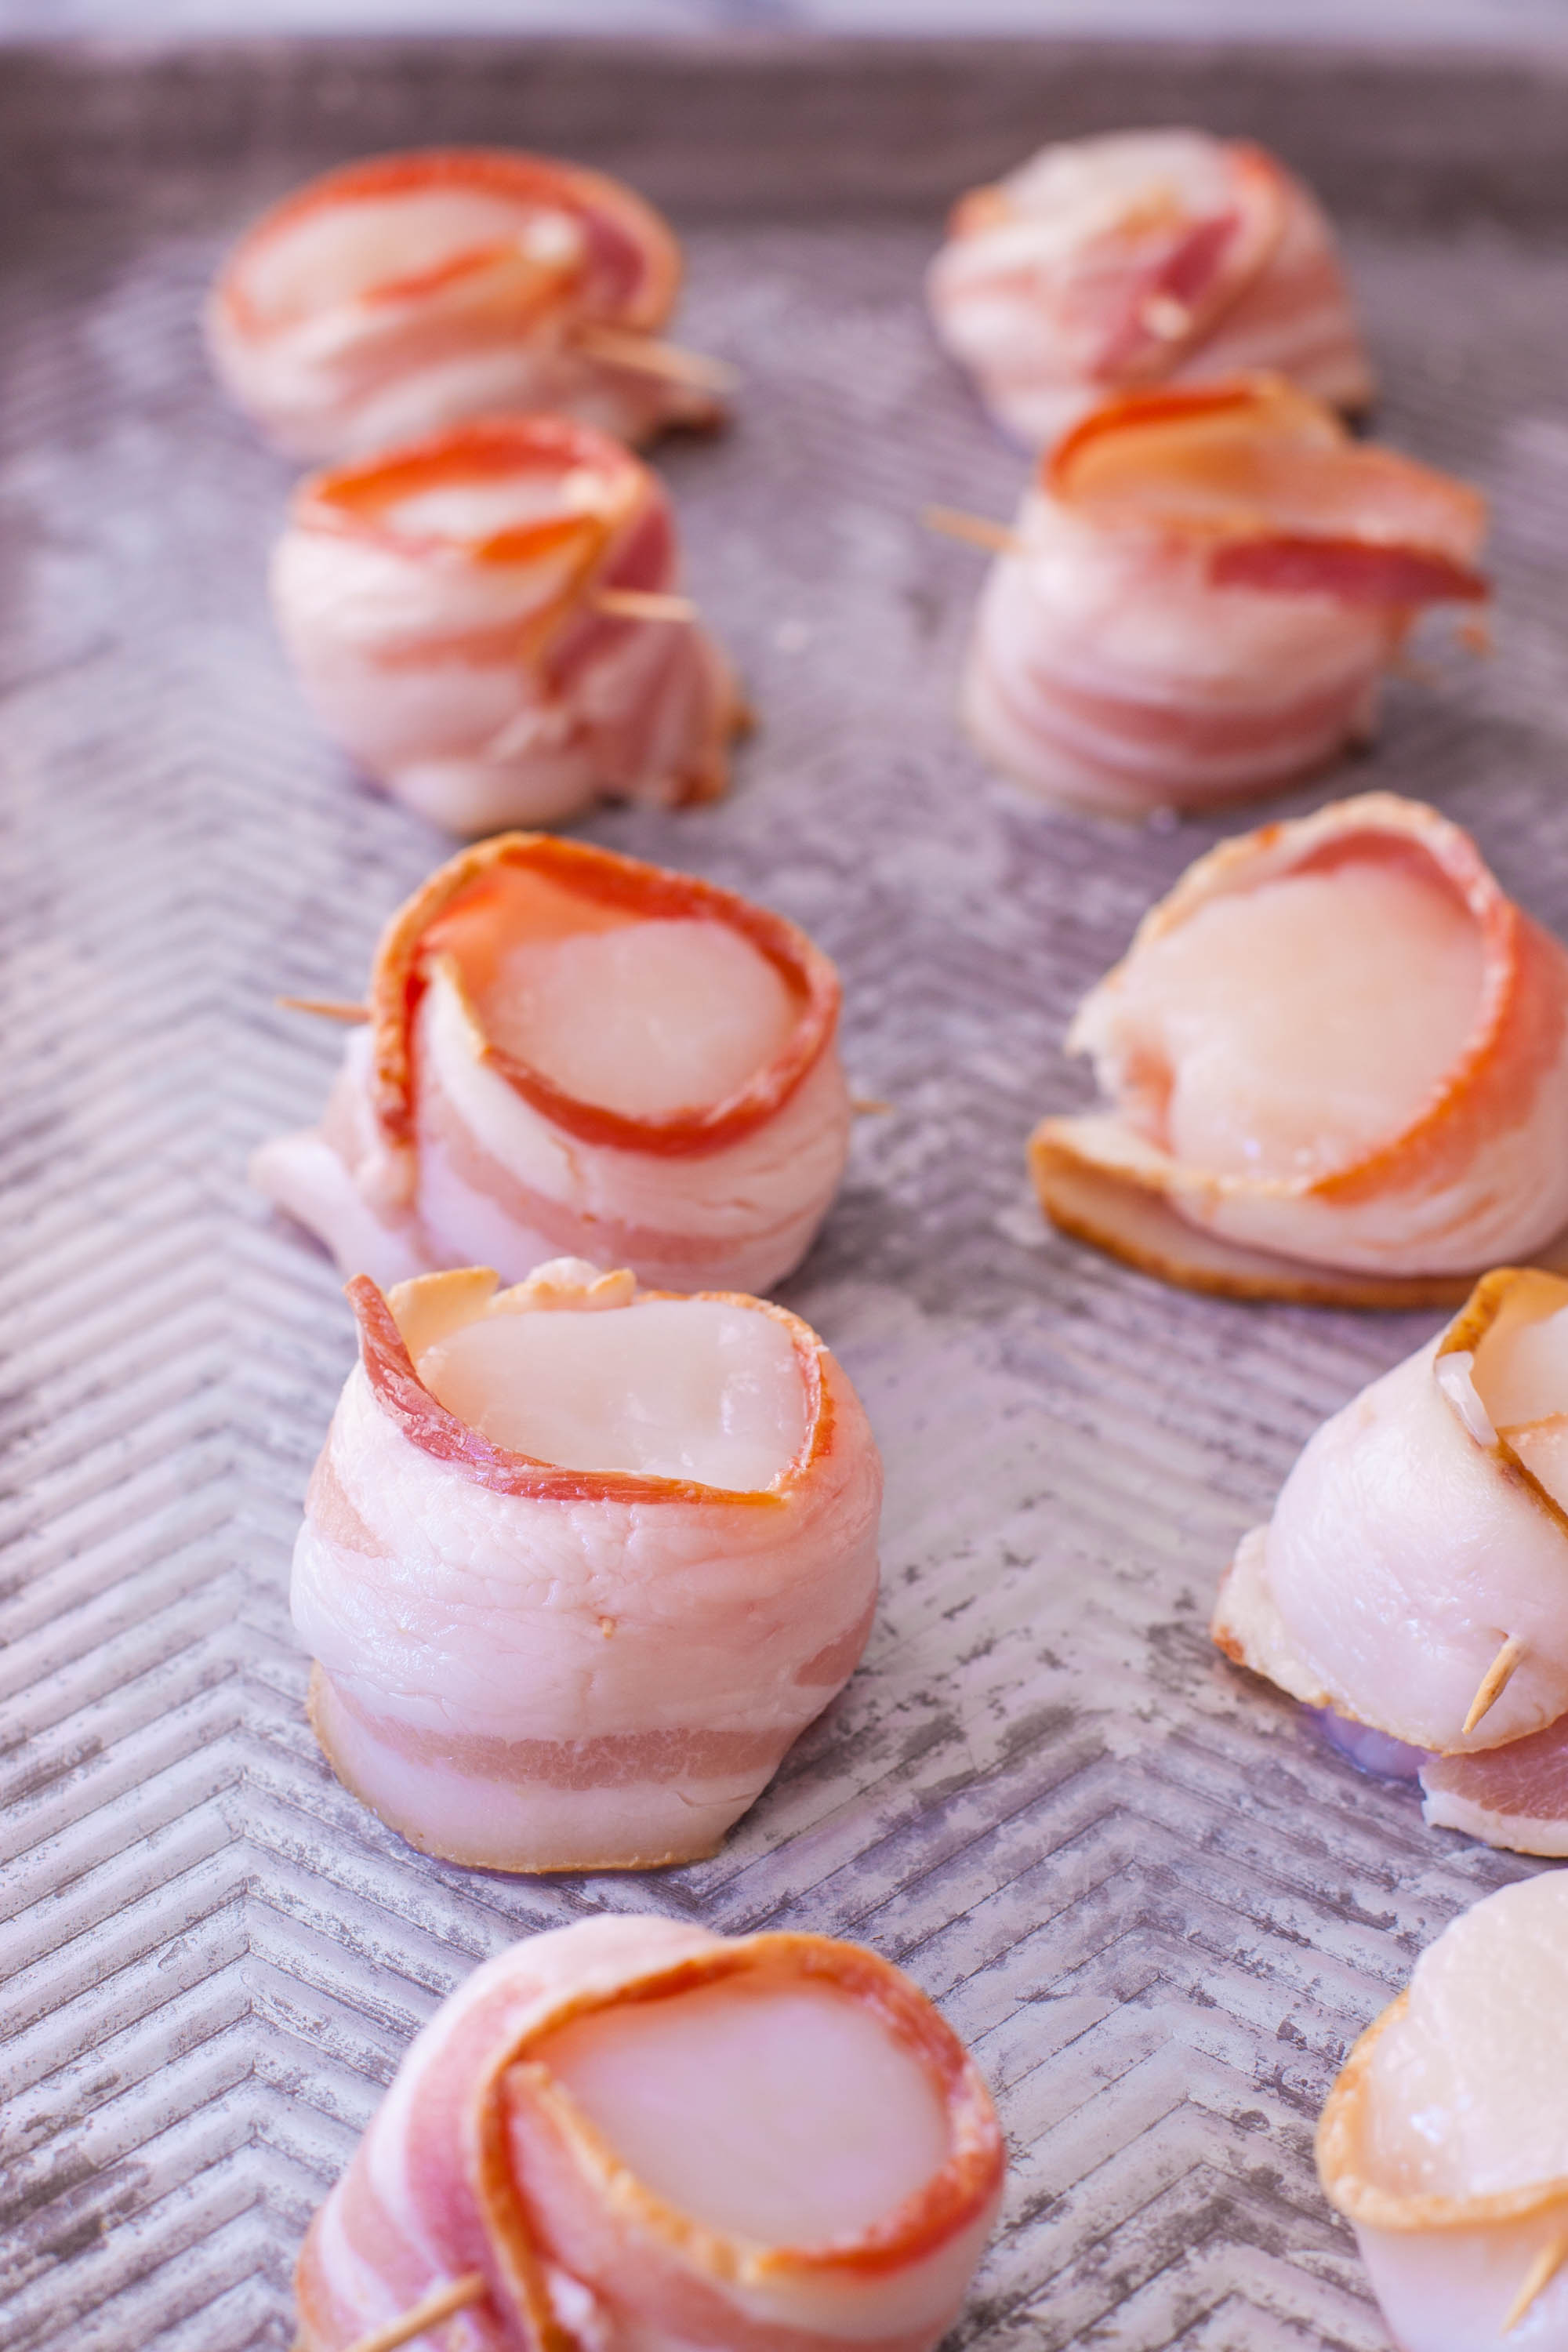 How to Make Bacon Wrapped Scallops in the Oven